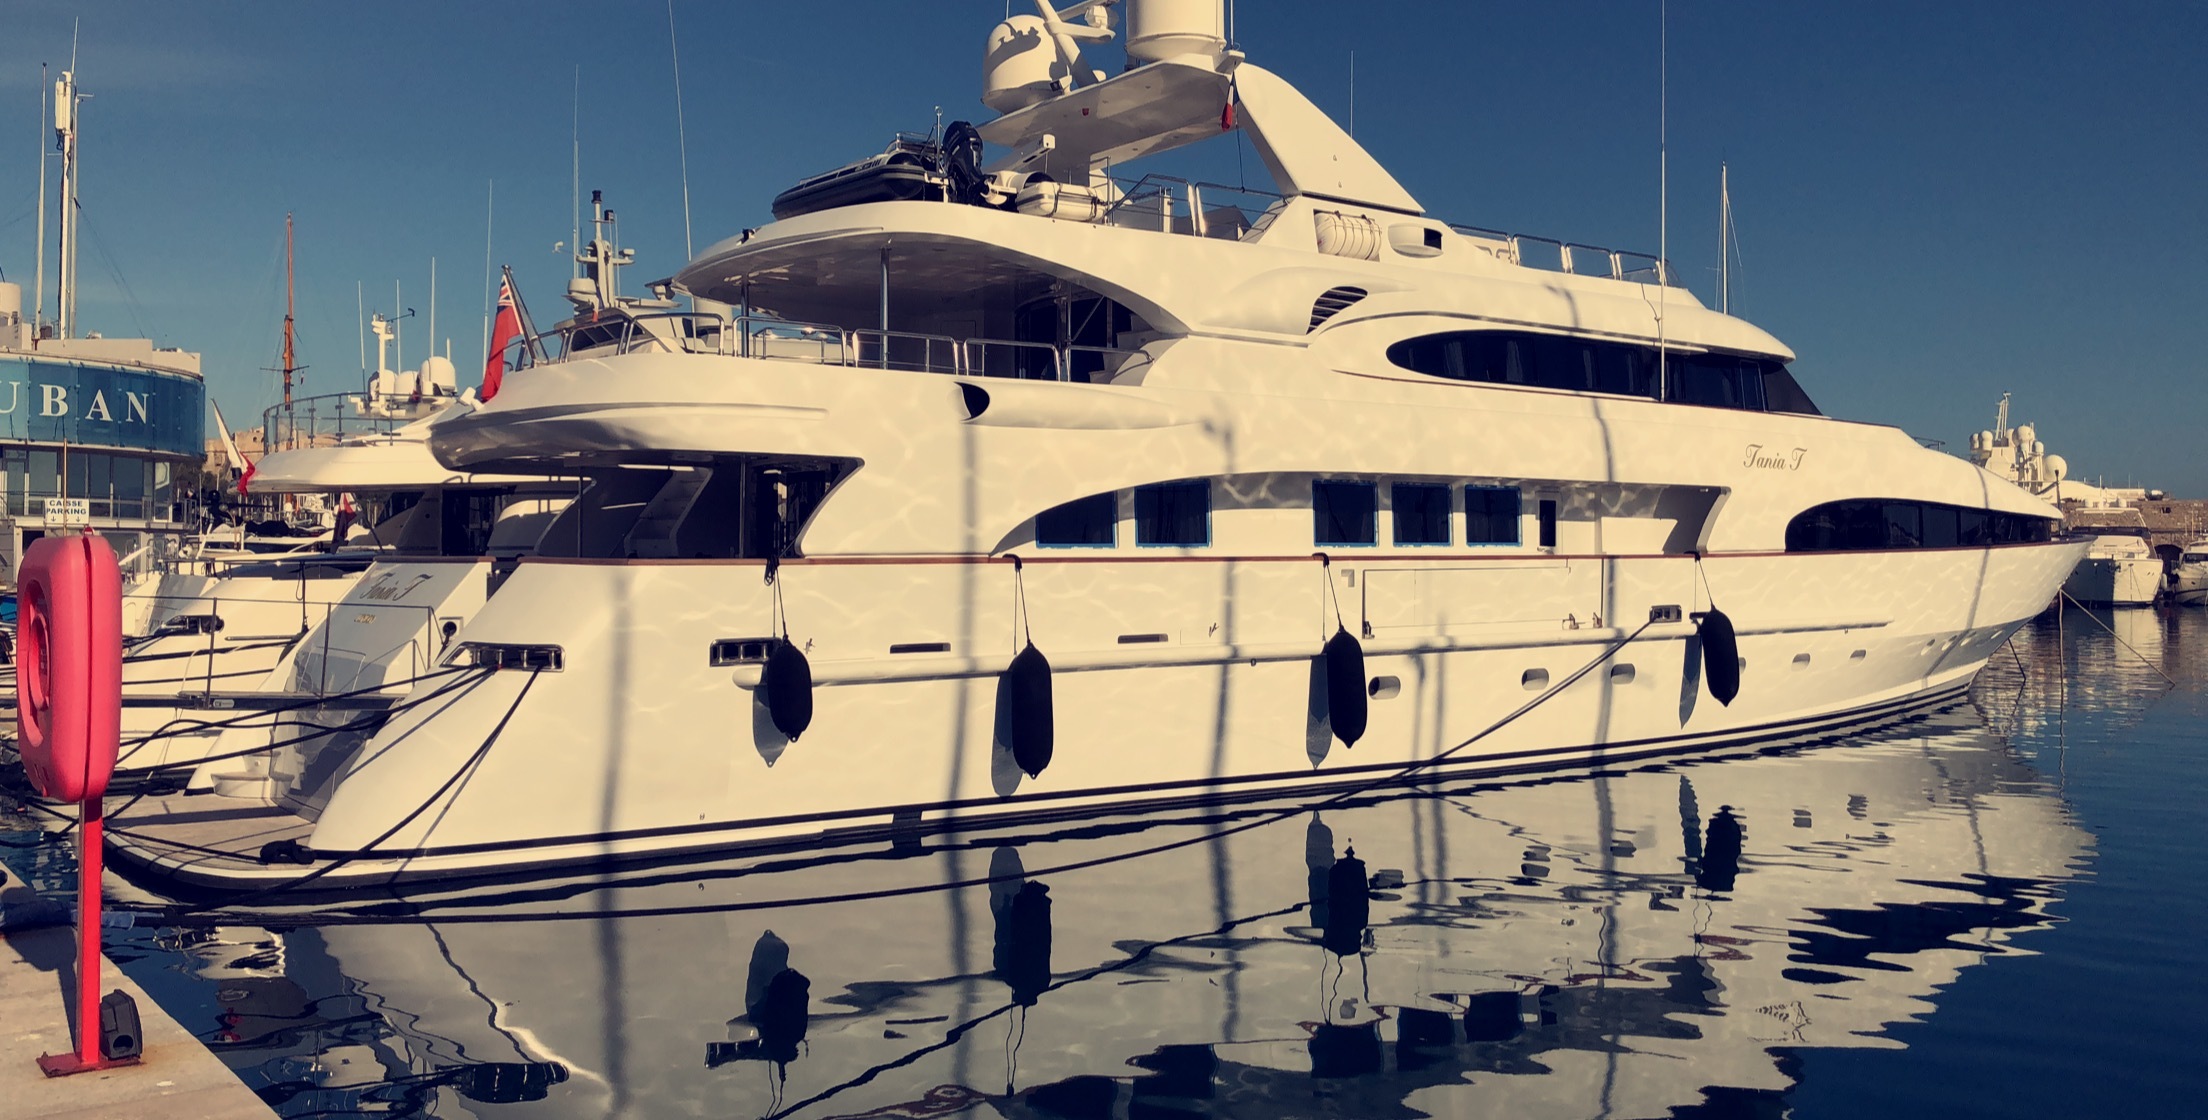 Yacht in the South of France. In Antibes